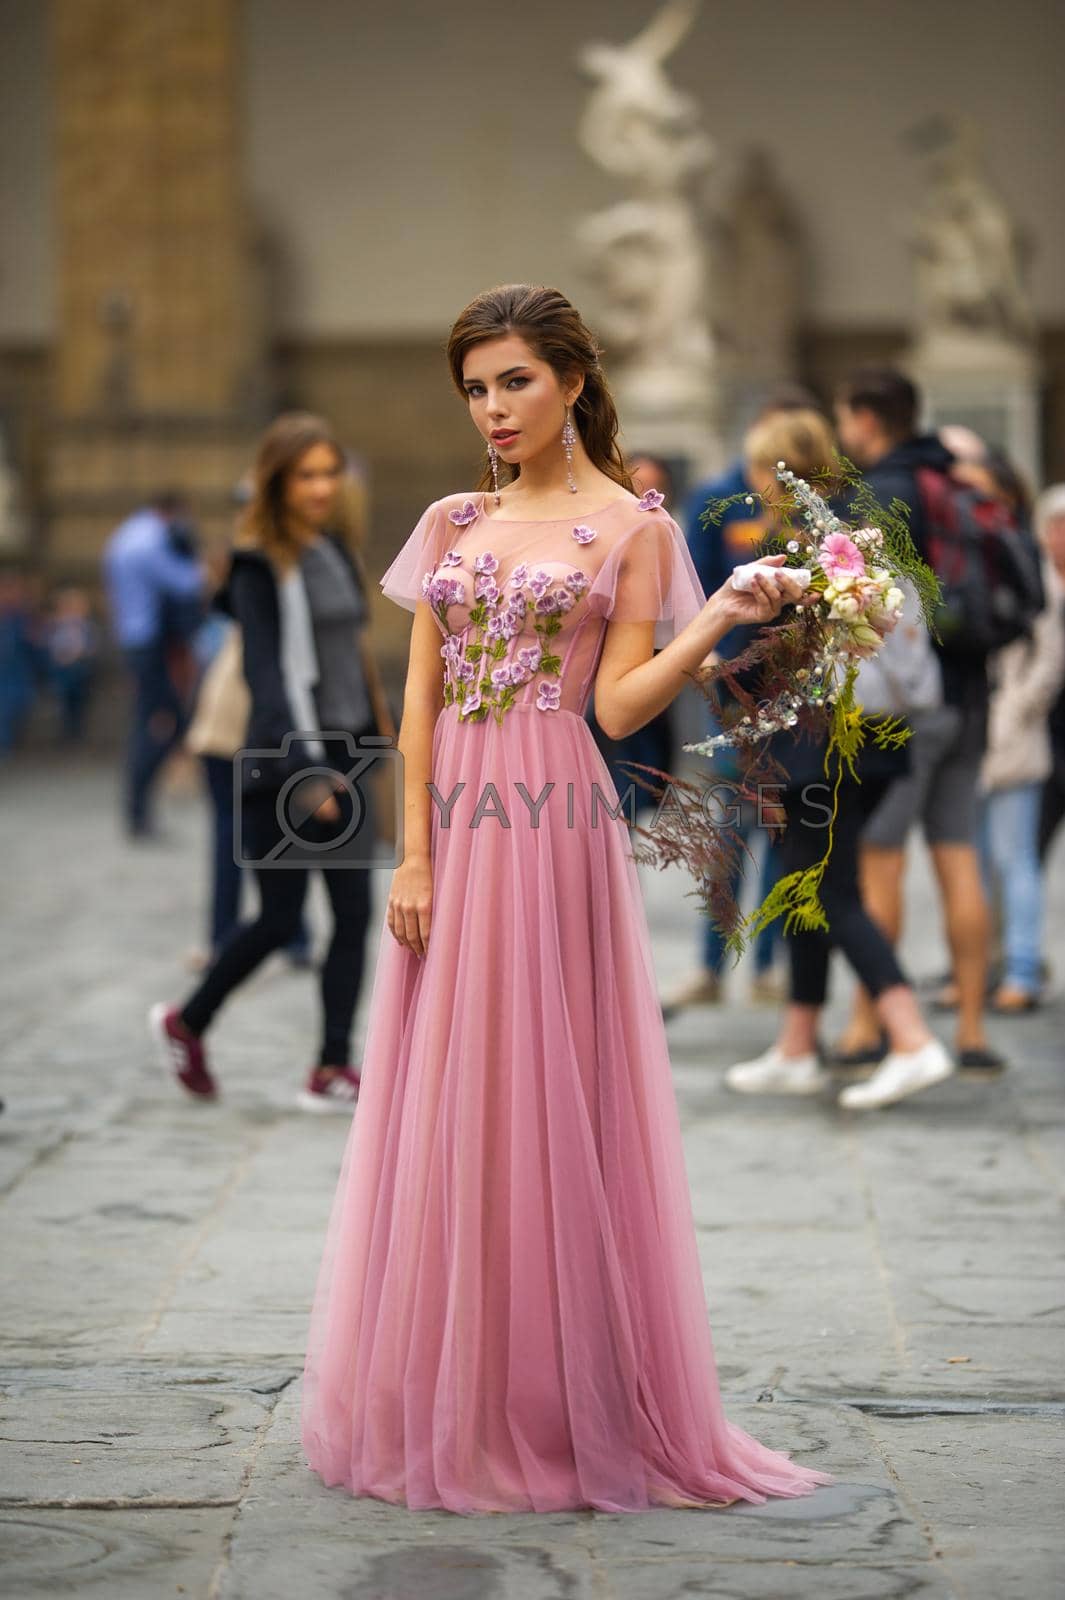 Royalty free image of A bride in a pink dress with a bouquet stands in the center of the Old City of Florence in Italy by Lobachad